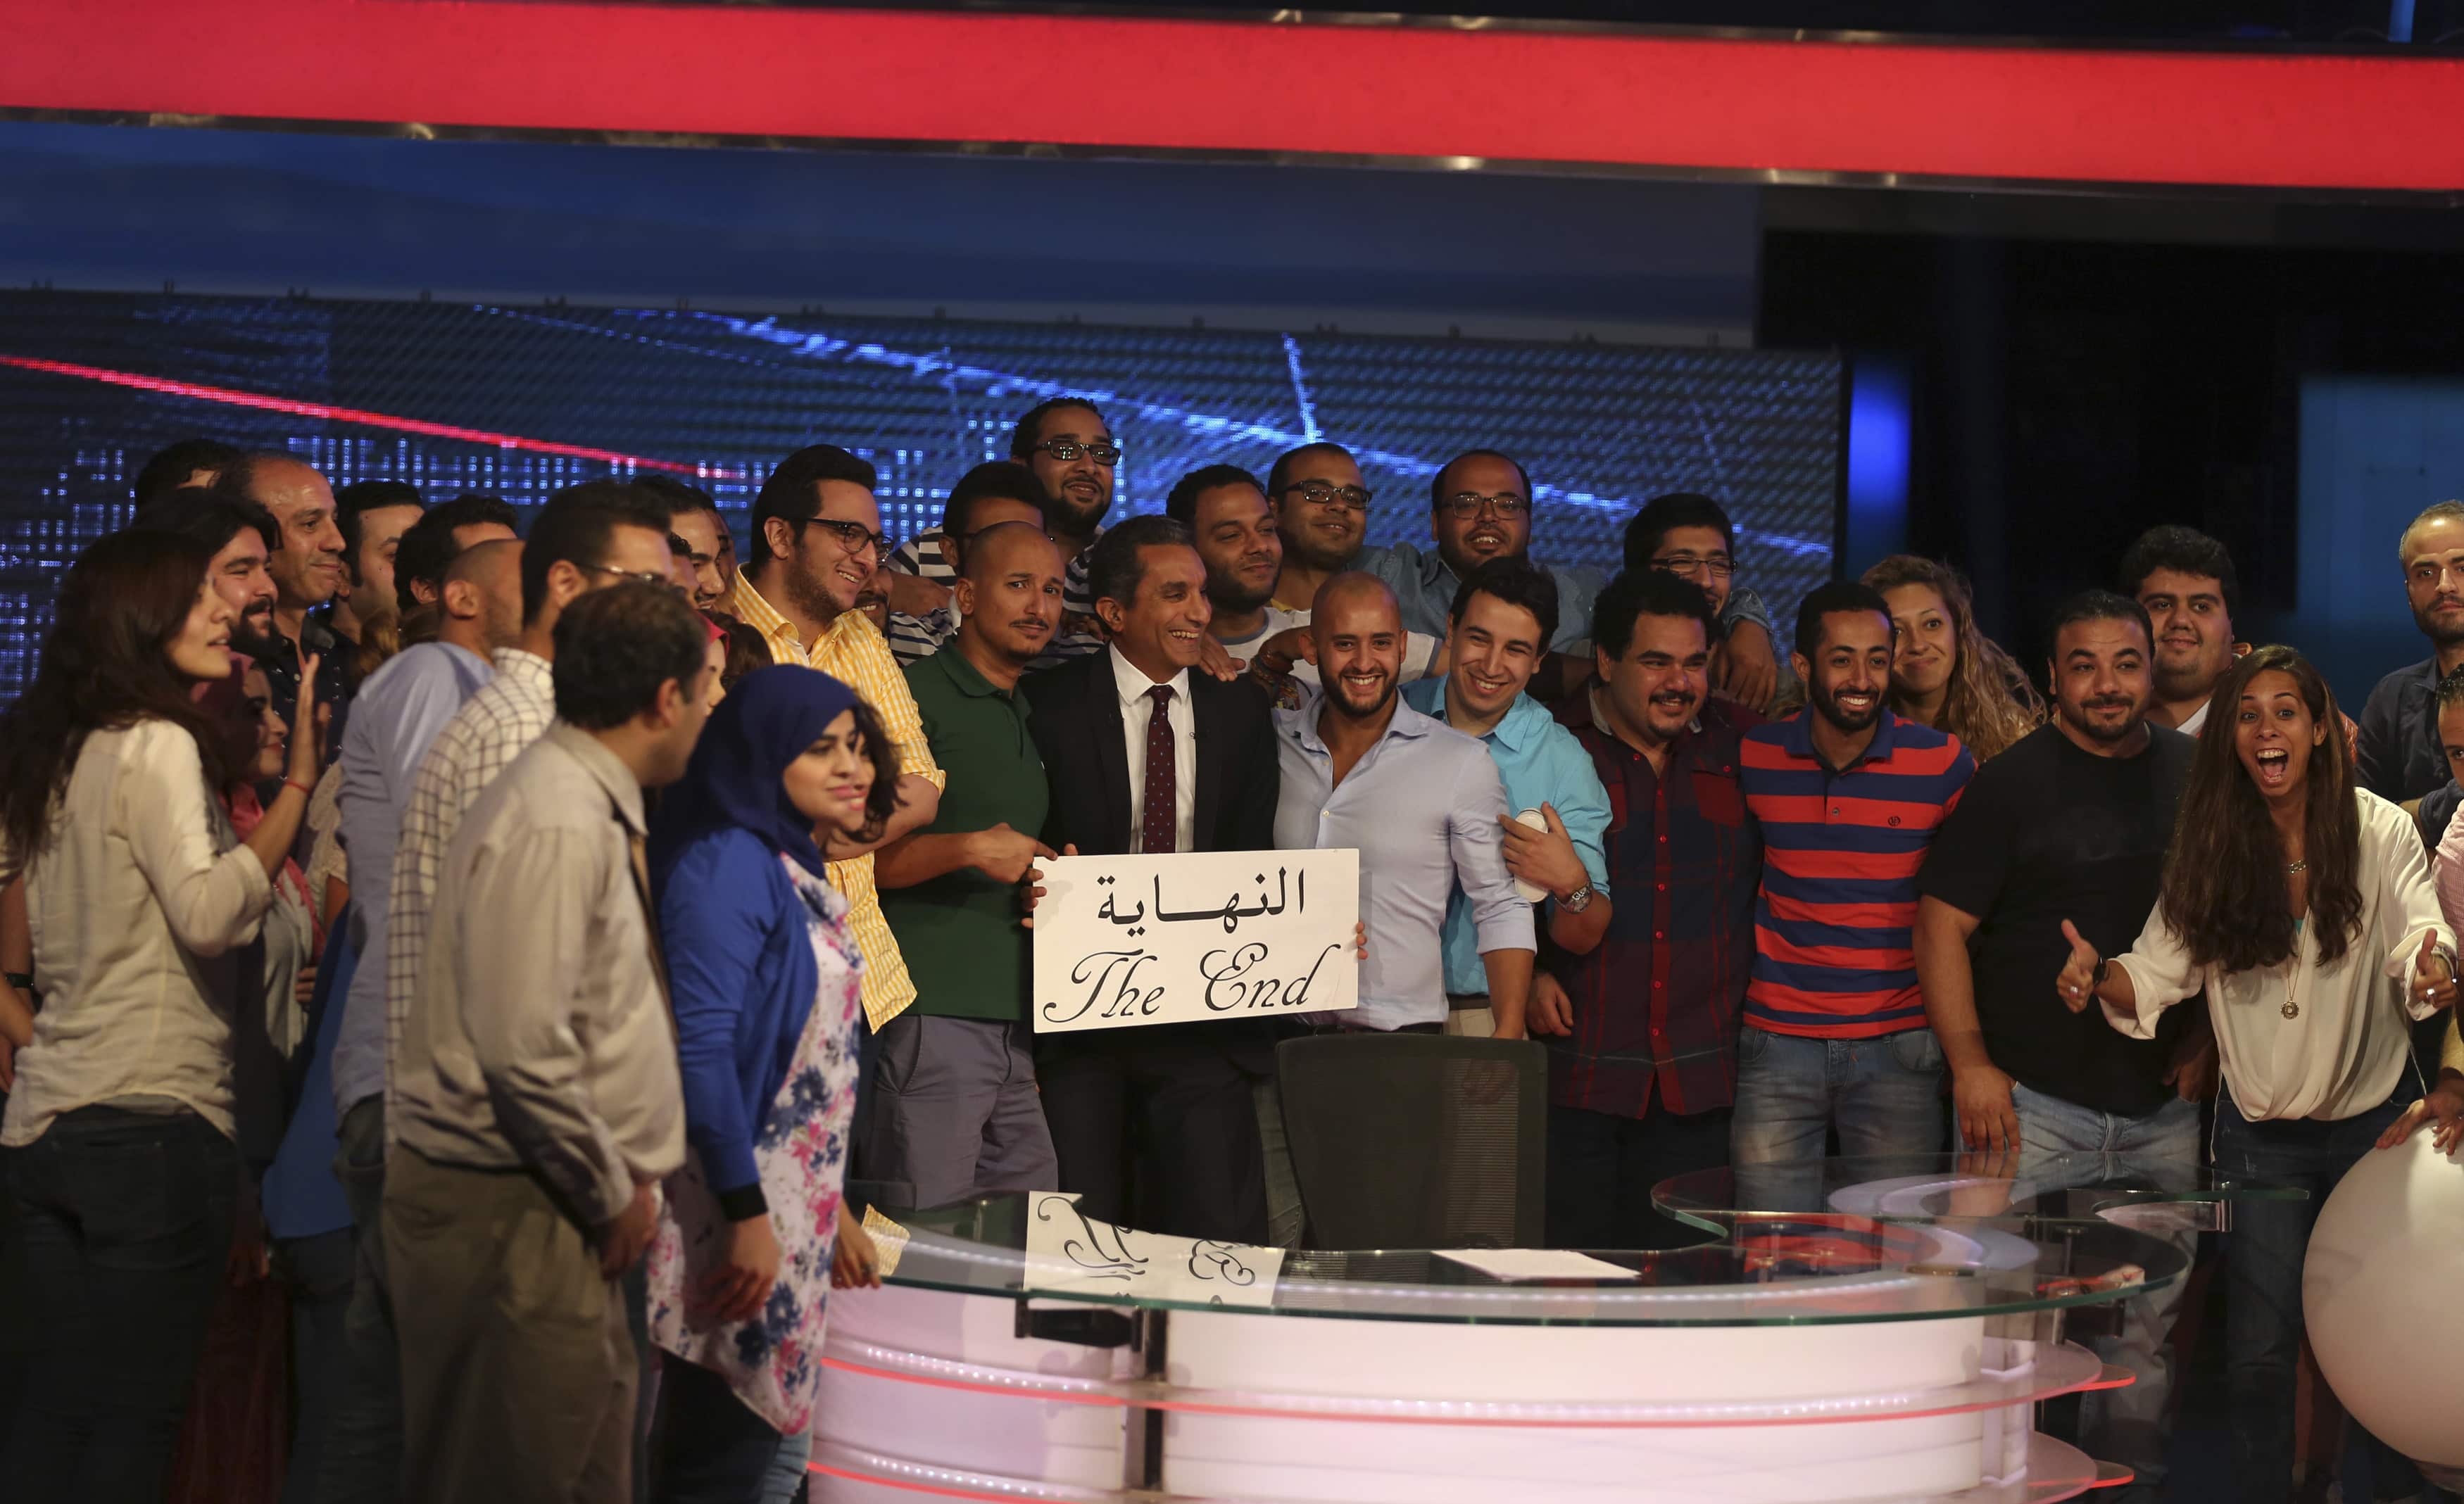 Egyptian satirist Bassem Youssef (C) poses for a photo with the crew of his show 'al-Bernameg' after announcing its cancellation in Cairo on 2 June 2014, REUTERS/Mohamed Abd El Ghany